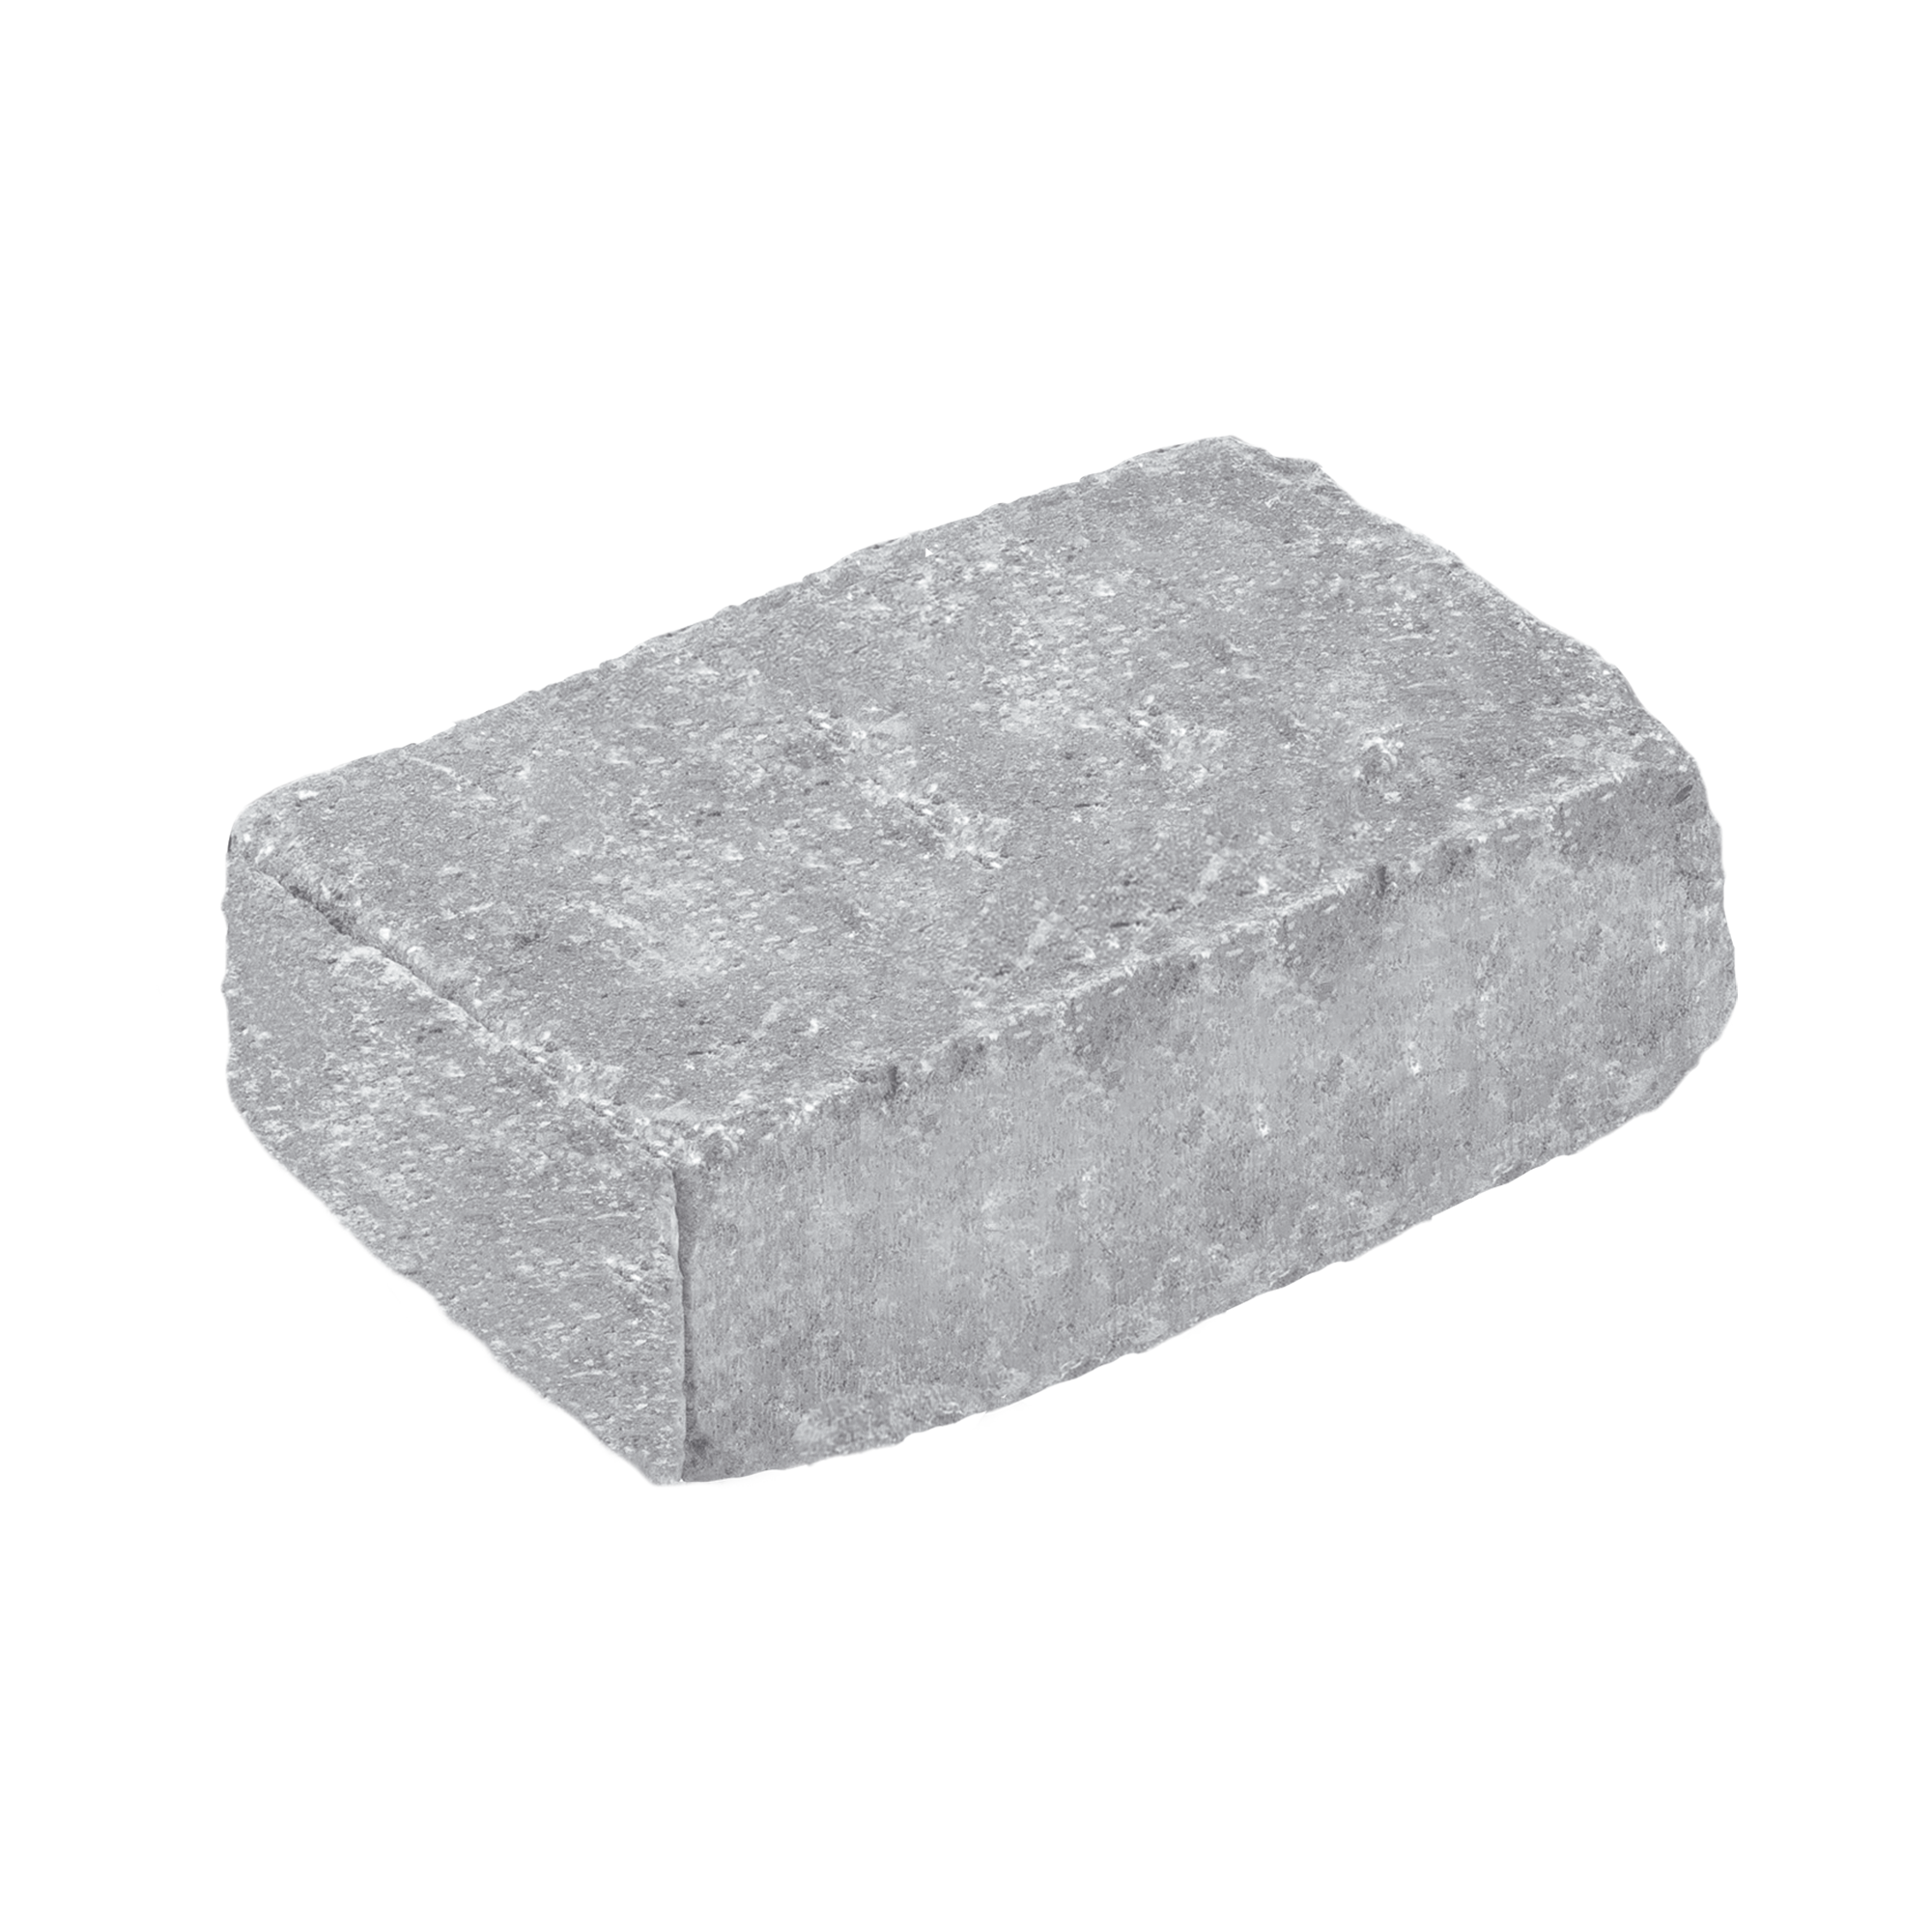 Pflasterstein 'T-Wall Aged' Beton grau 21 x 14 x 7 cm + product picture